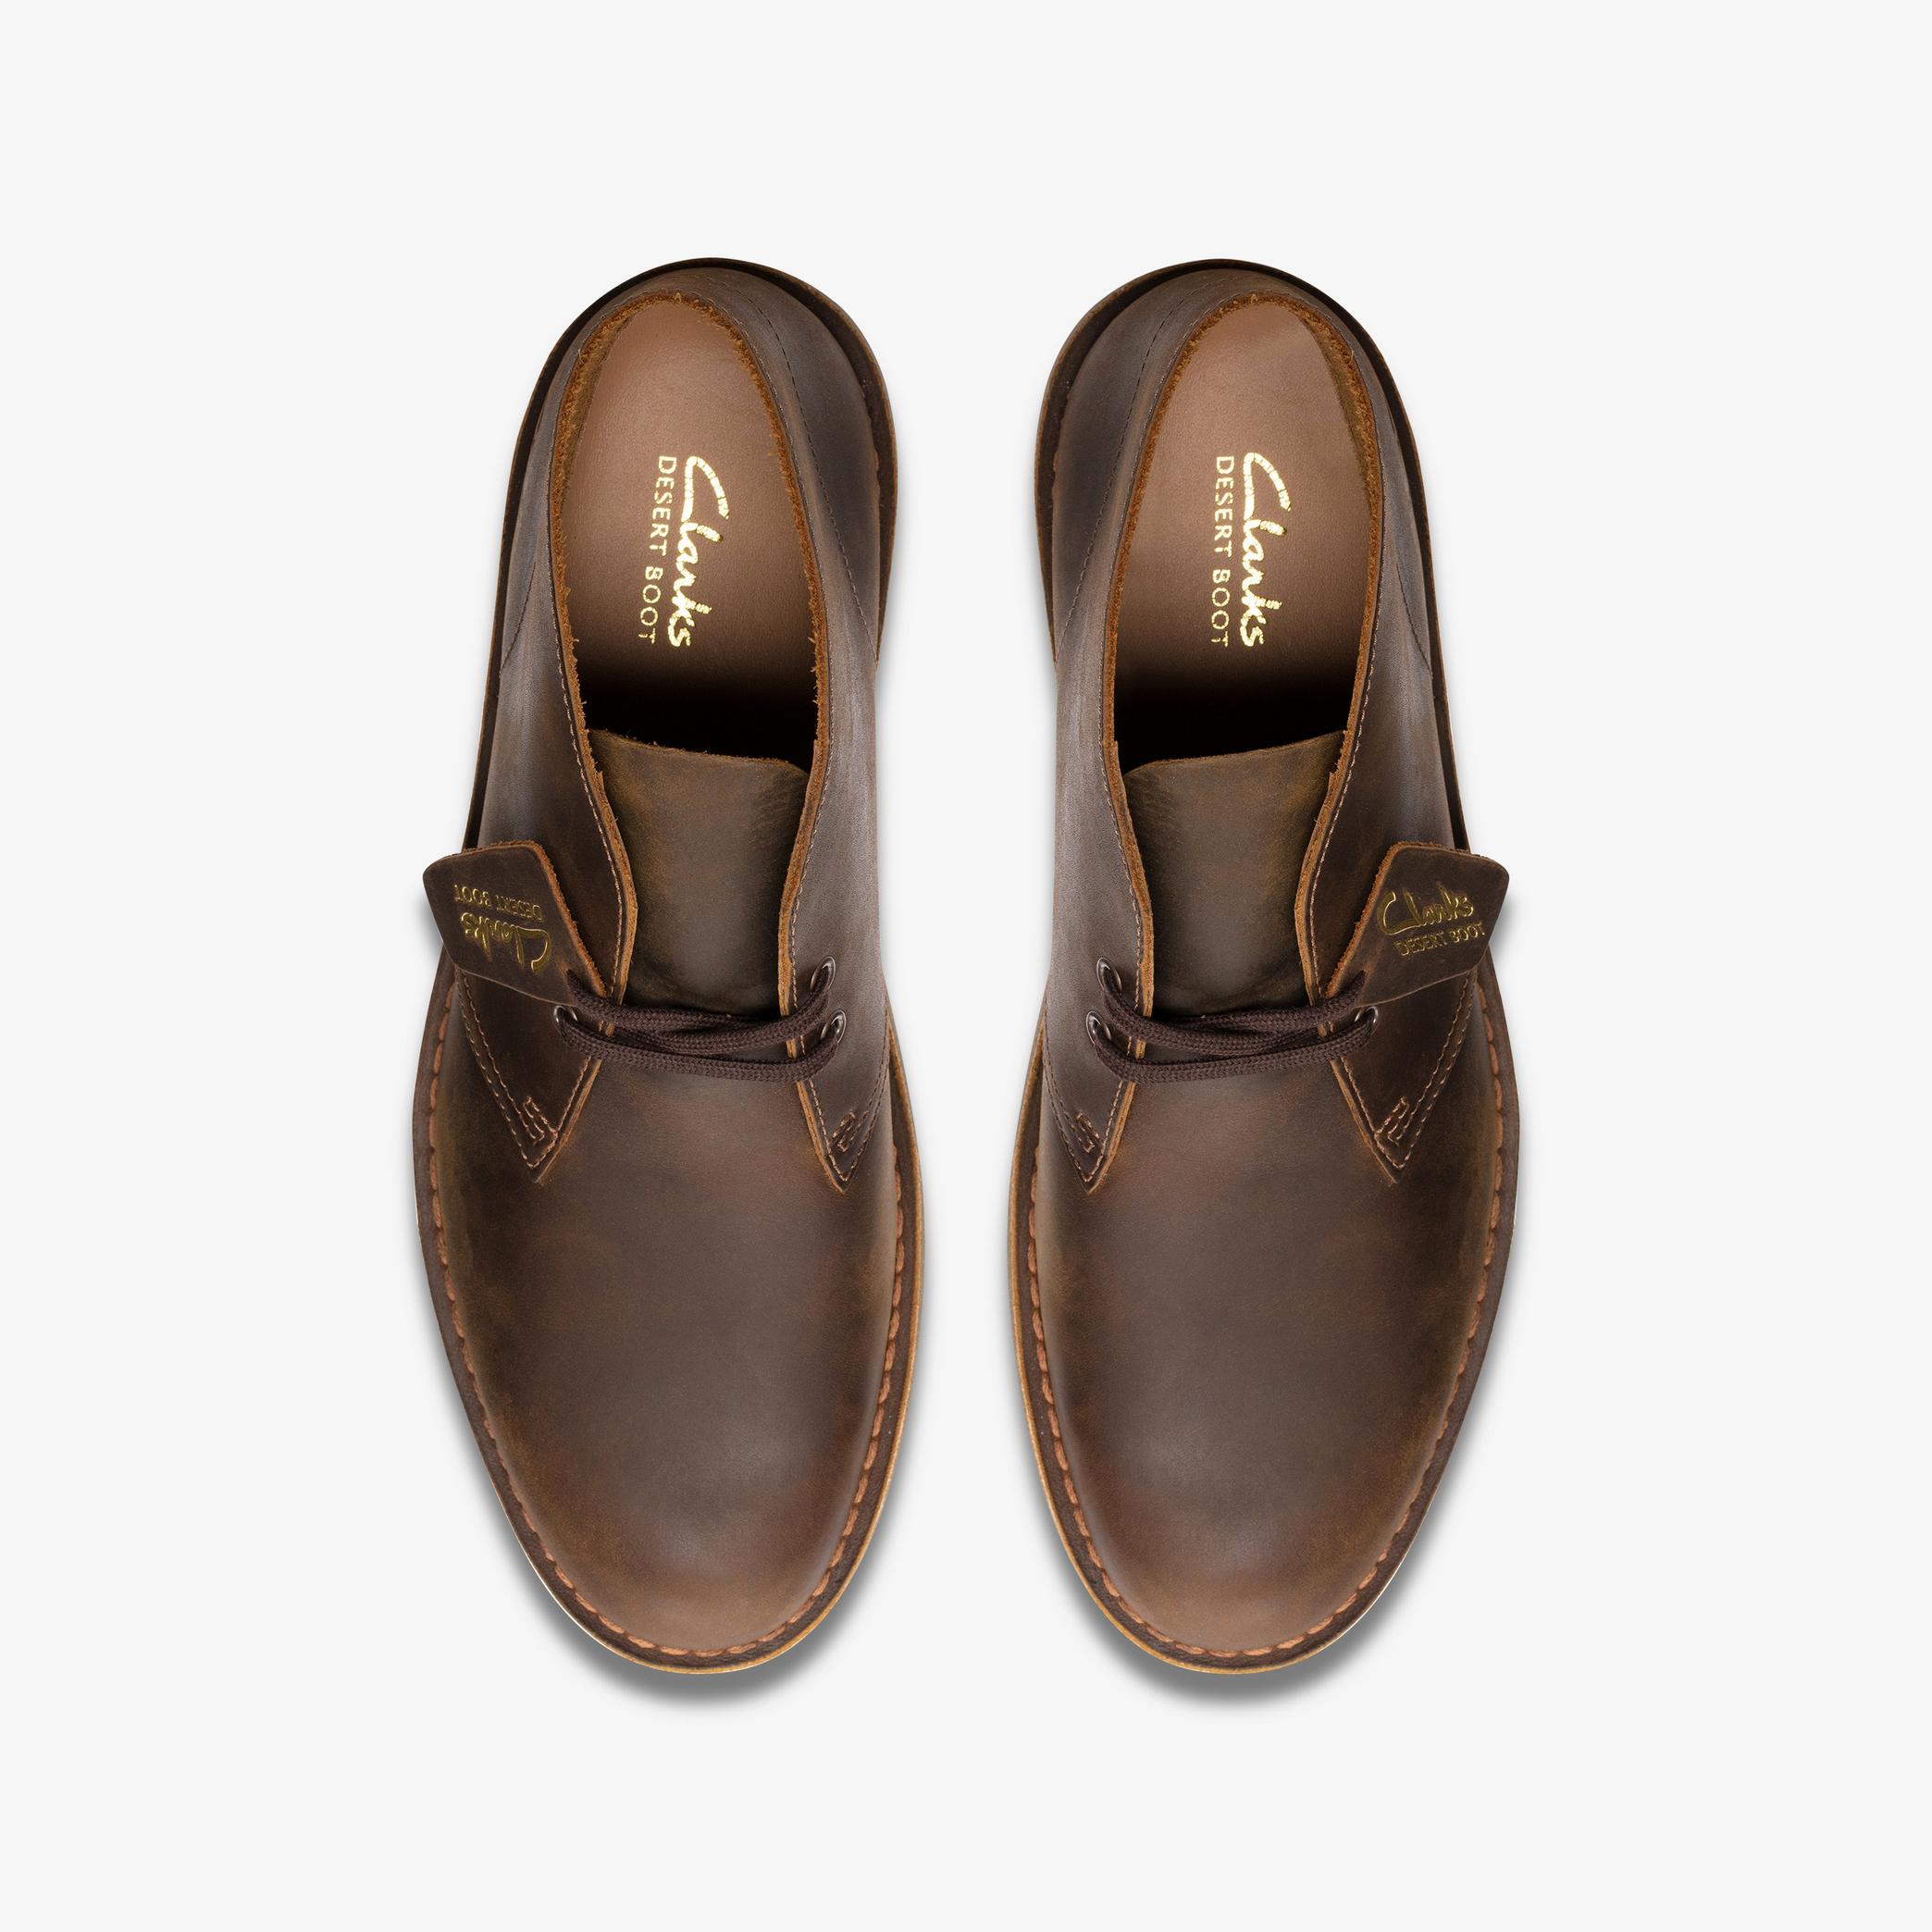 Desert Boot Evo Beeswax Leather Desert Boots, view 7 of 8